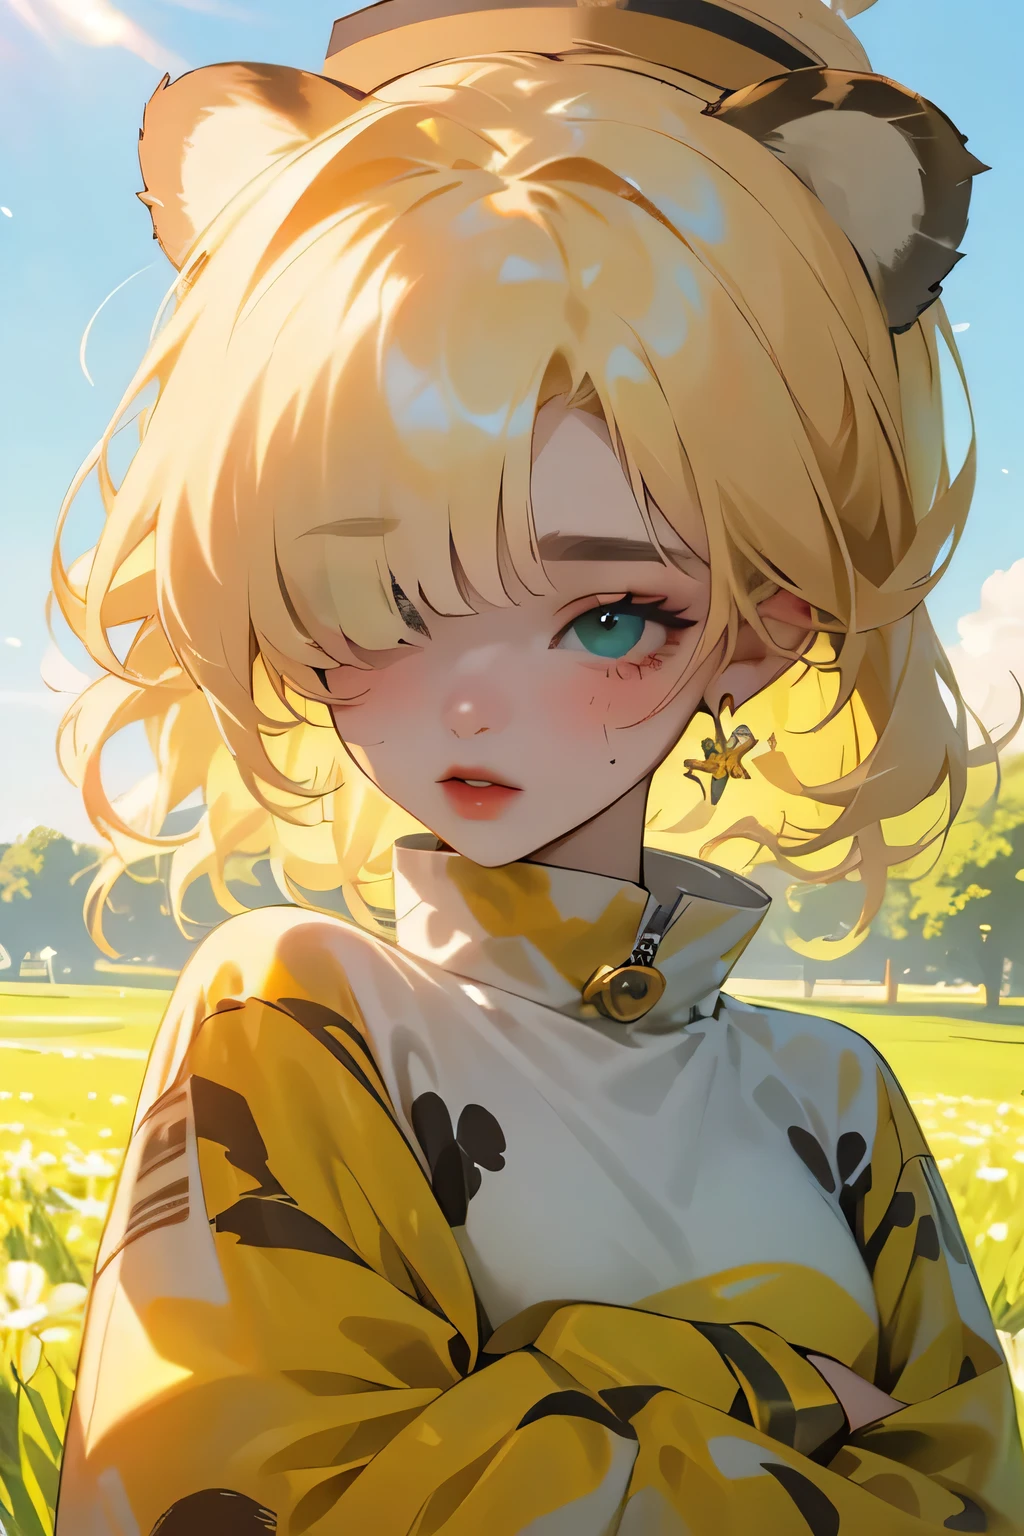 (high quality) (Best Quality) (Una Women) (correct physiognomy) (perfect students) (Perfect eyes) Women, blonde hair with bangs on the forehead, TWO cat ears growing out of his head, eyes with heterochromia dos ojos, one eye green and the other gold, sensitive lips, female appearance, soft facial features, thin eyebrows, soft skin, rosy cheeks, pink lips, silky eyelashes, dreamy expression, middle age, youth clothing, glitter sweatshirt, tiger print, photo illuminated by sunlight, Women en un campo de flores al aire libre con un cielo azulado de nubes